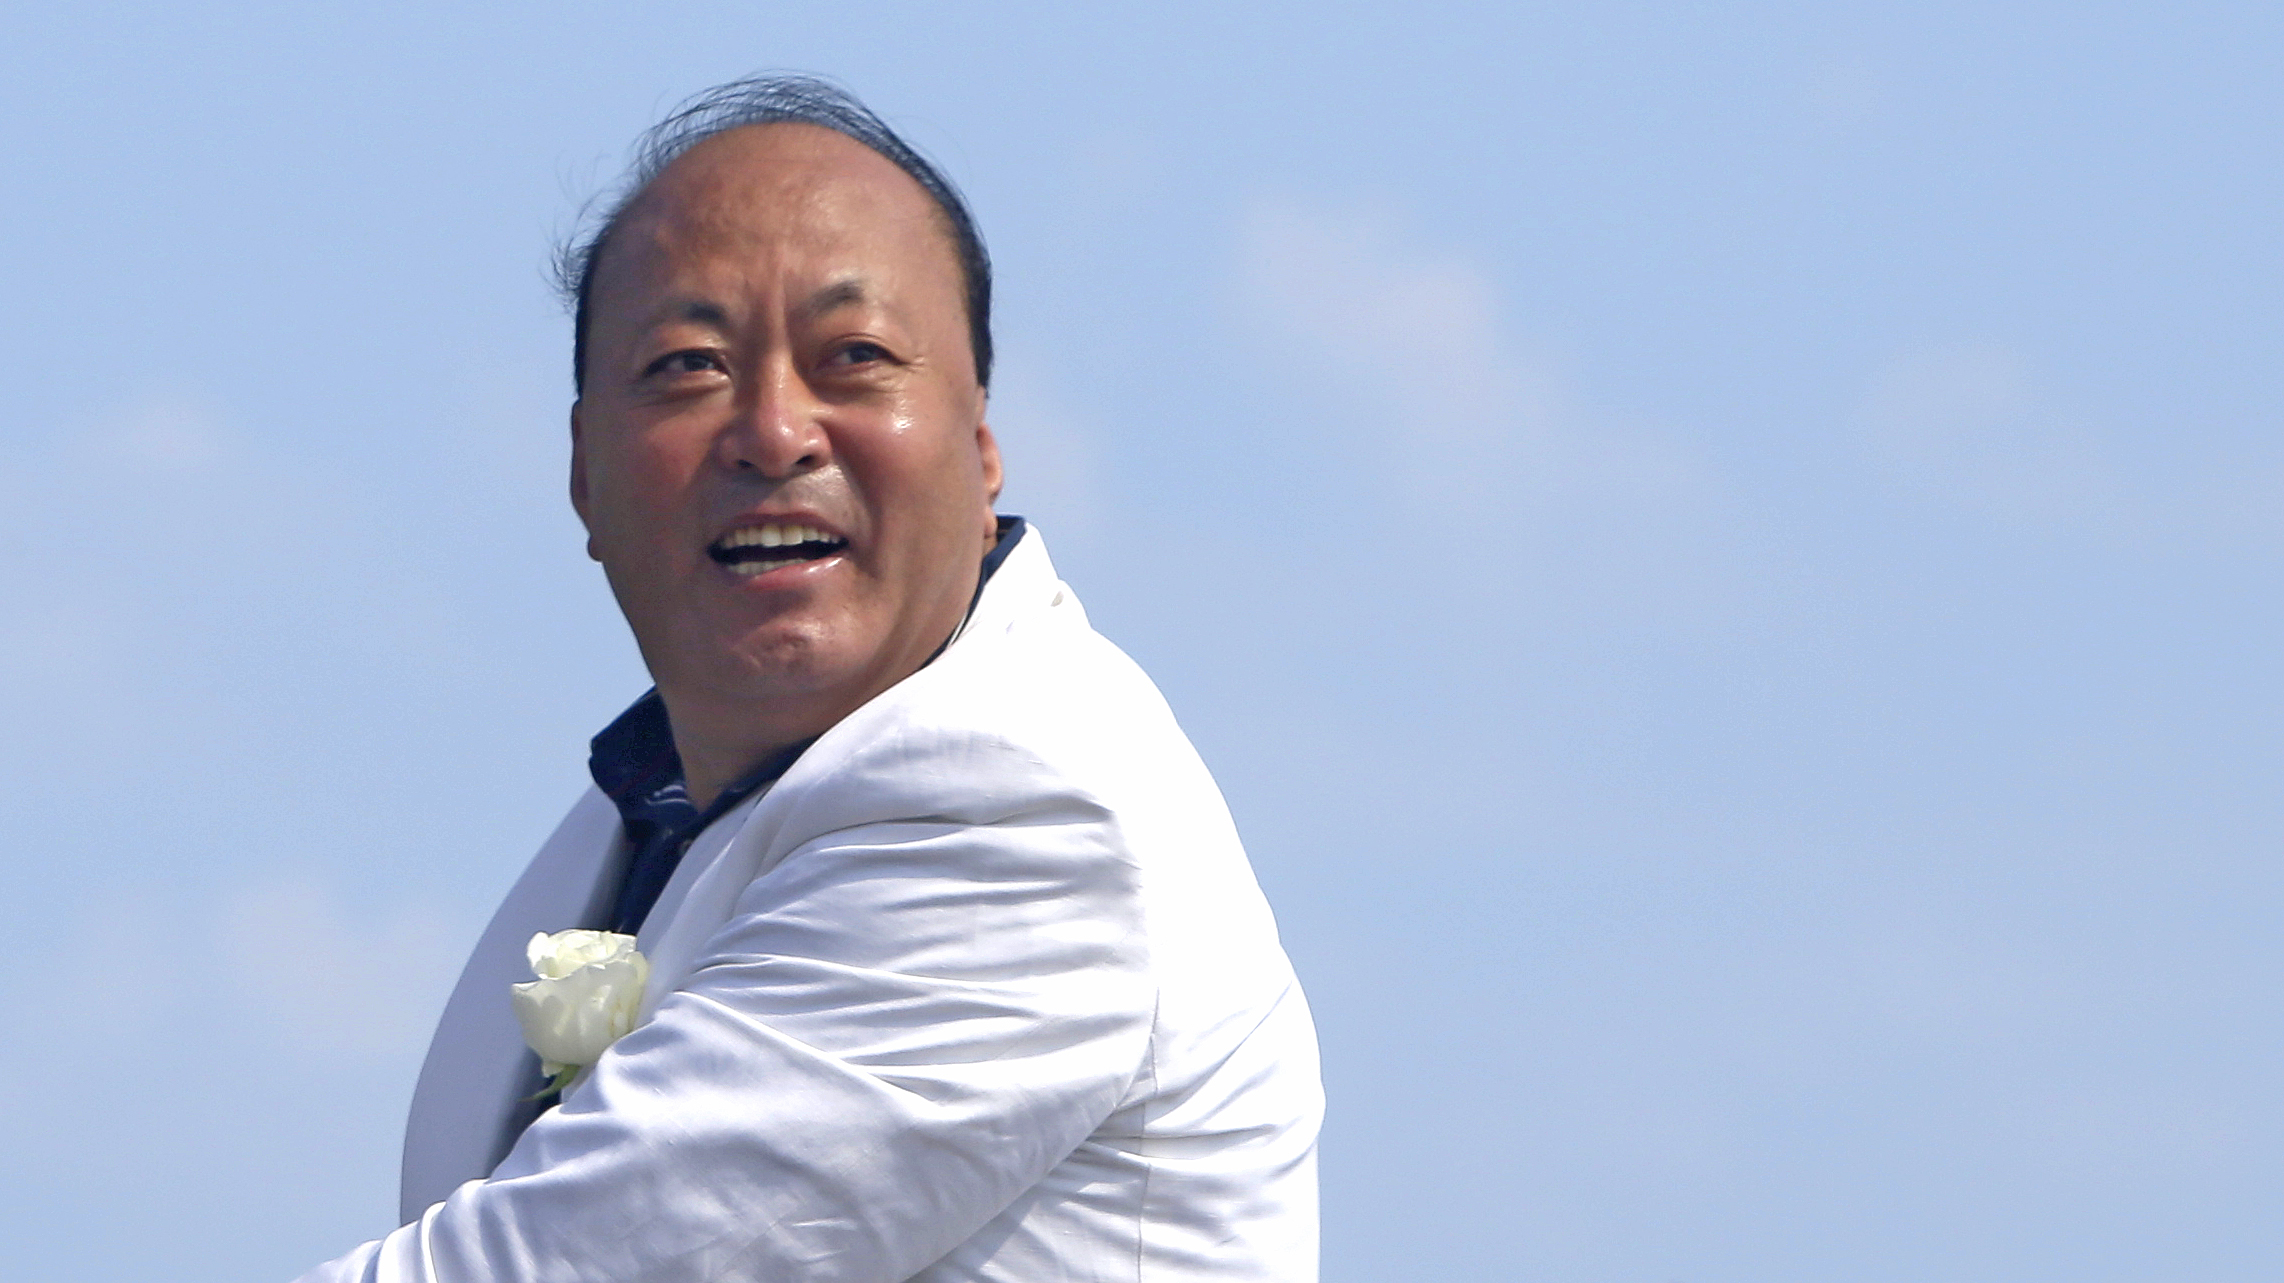 Tiens Group CEO Li Jinyuan poses during a parade on the Promenade des Anglais in Nice, southeastern France, on May 8, 2015 (Lionel Cironneau—AP)